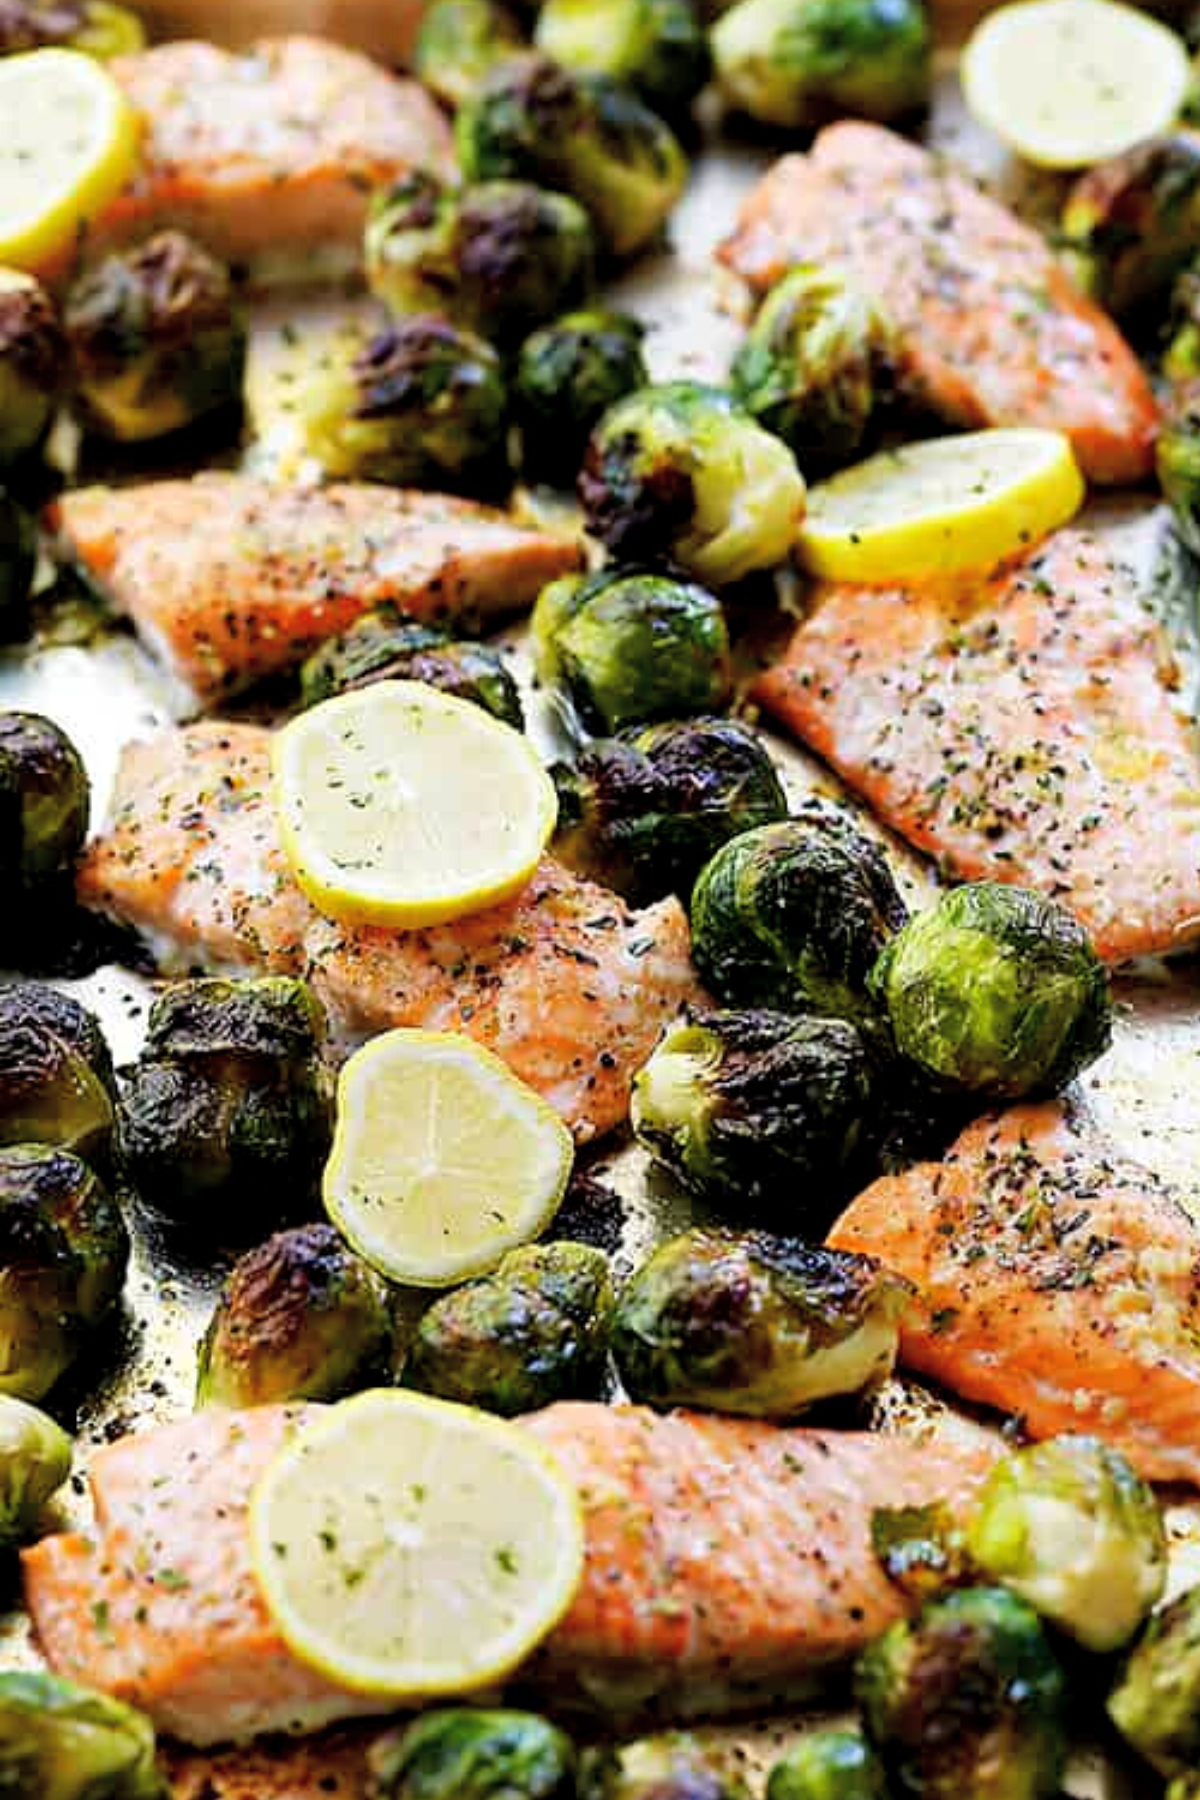 close up photo of a baking sheet with oven roasted salmon fillets topped with lemon slices, and brussel sprouts arranged around the fillets.